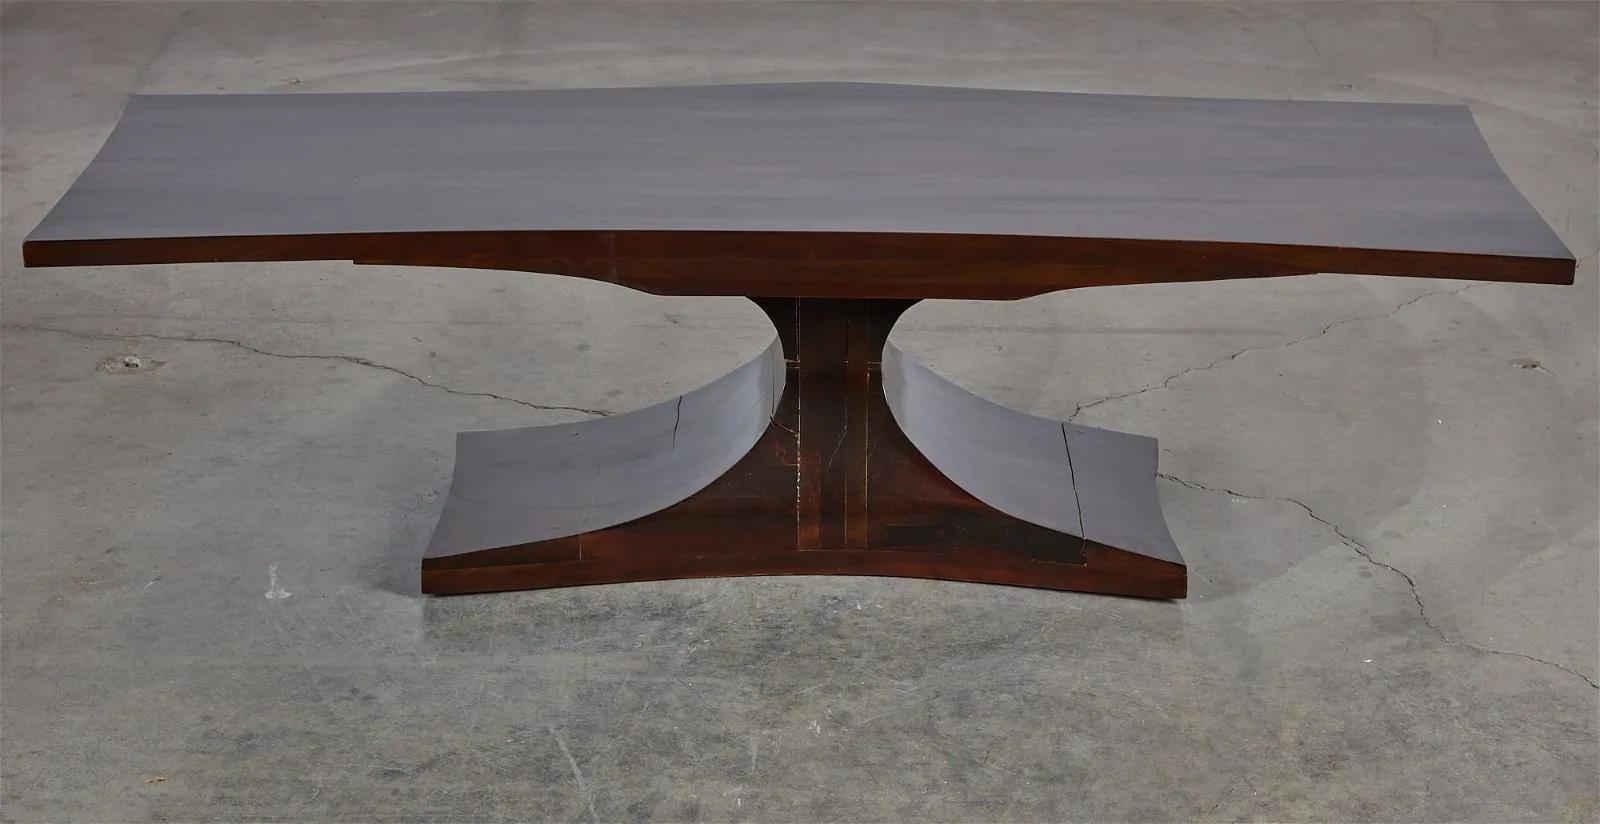 Hand-Carved Modernist Mid 20th Century Sculptured Hardwood Coffee Table For Sale